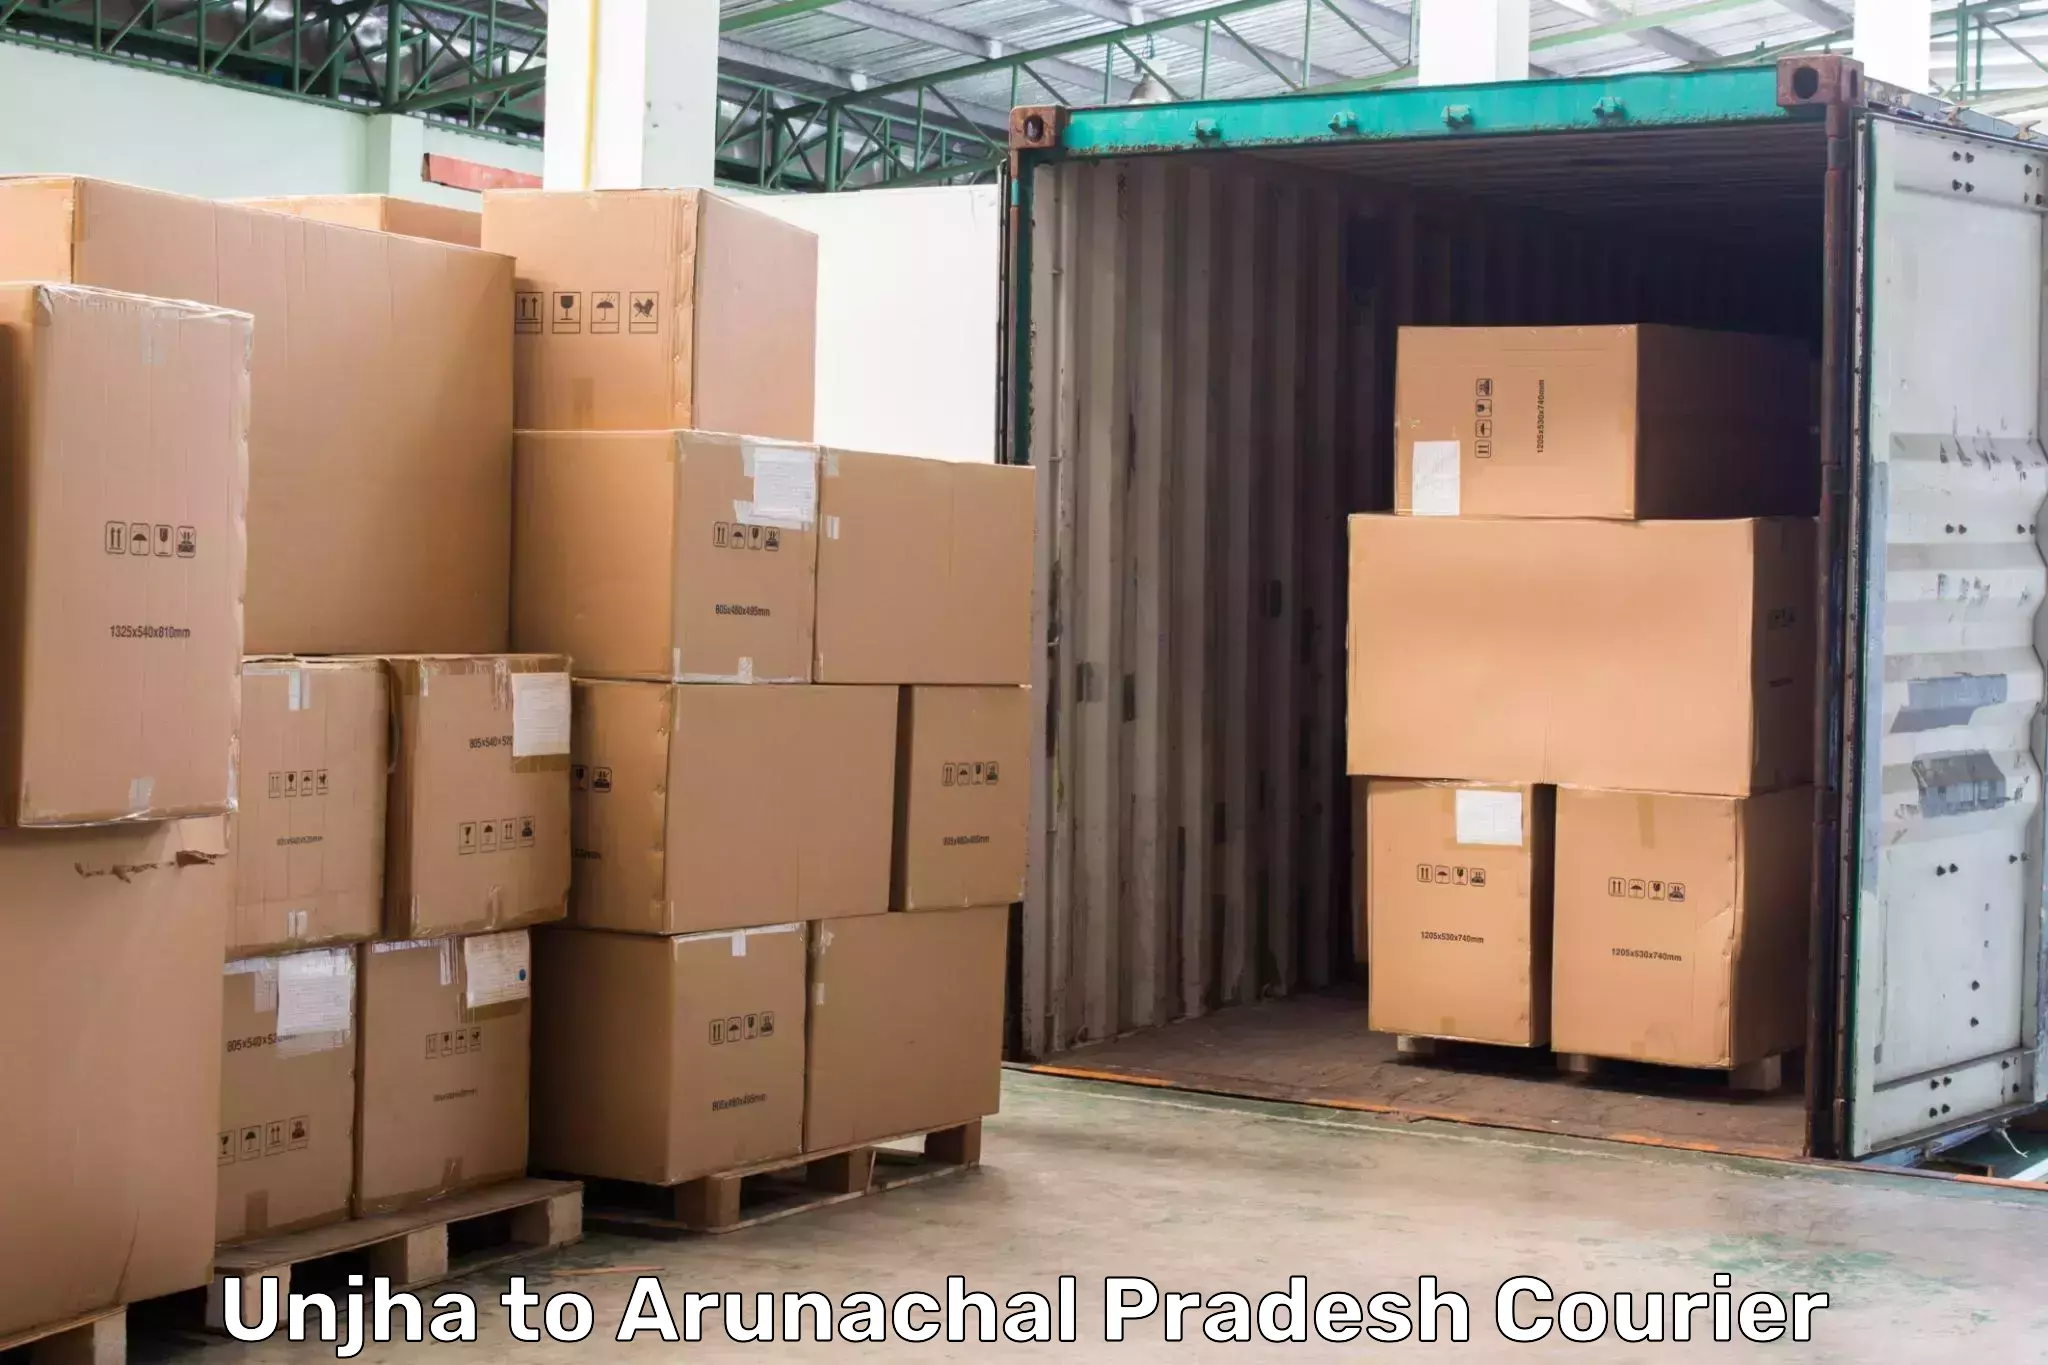 Express logistics service in Unjha to Lohit